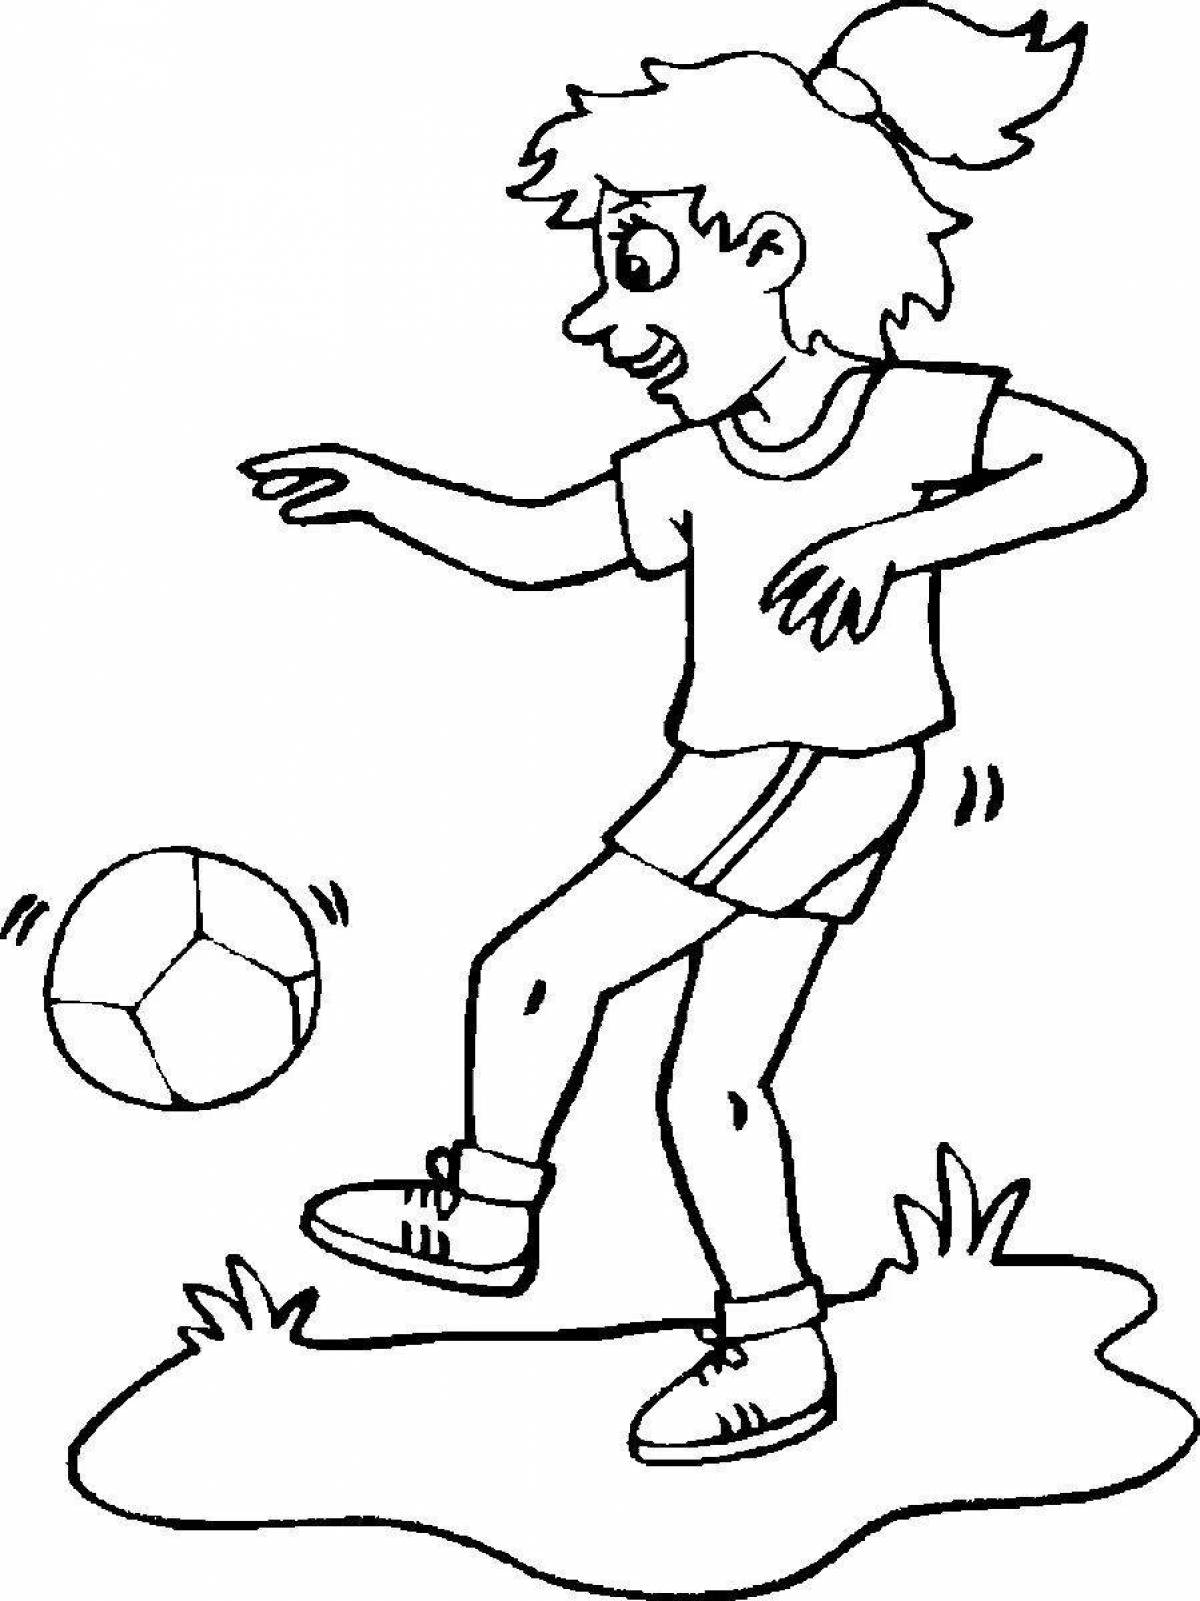 Coloring book physical education and sports with imagination